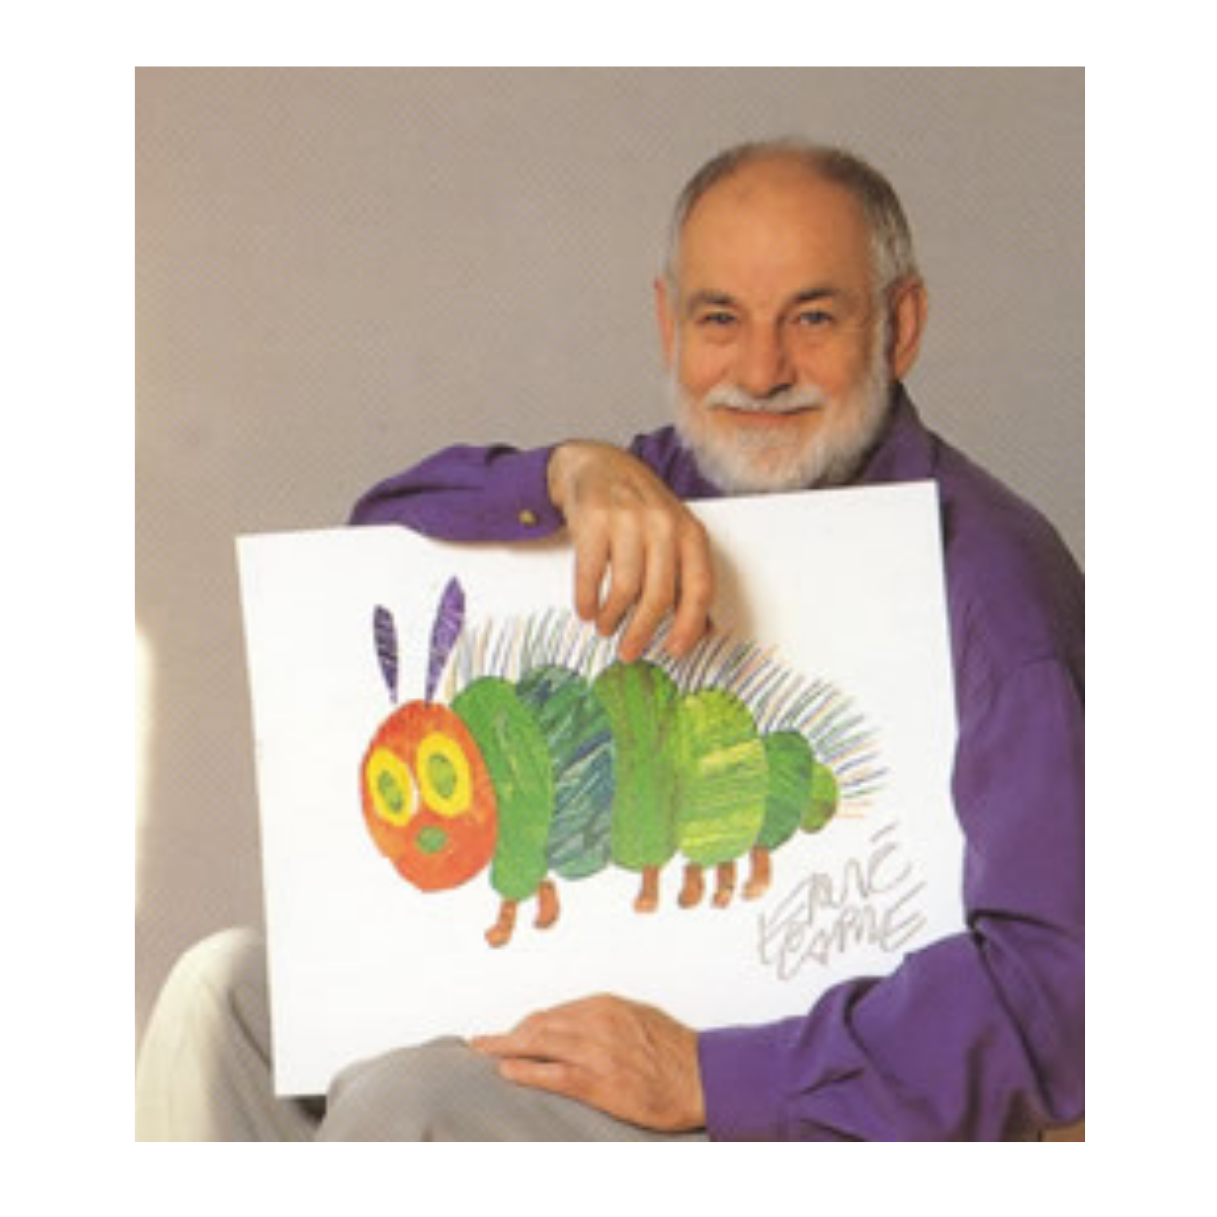 Eric Carle with a drawing of the Very Hungry Caterpillar